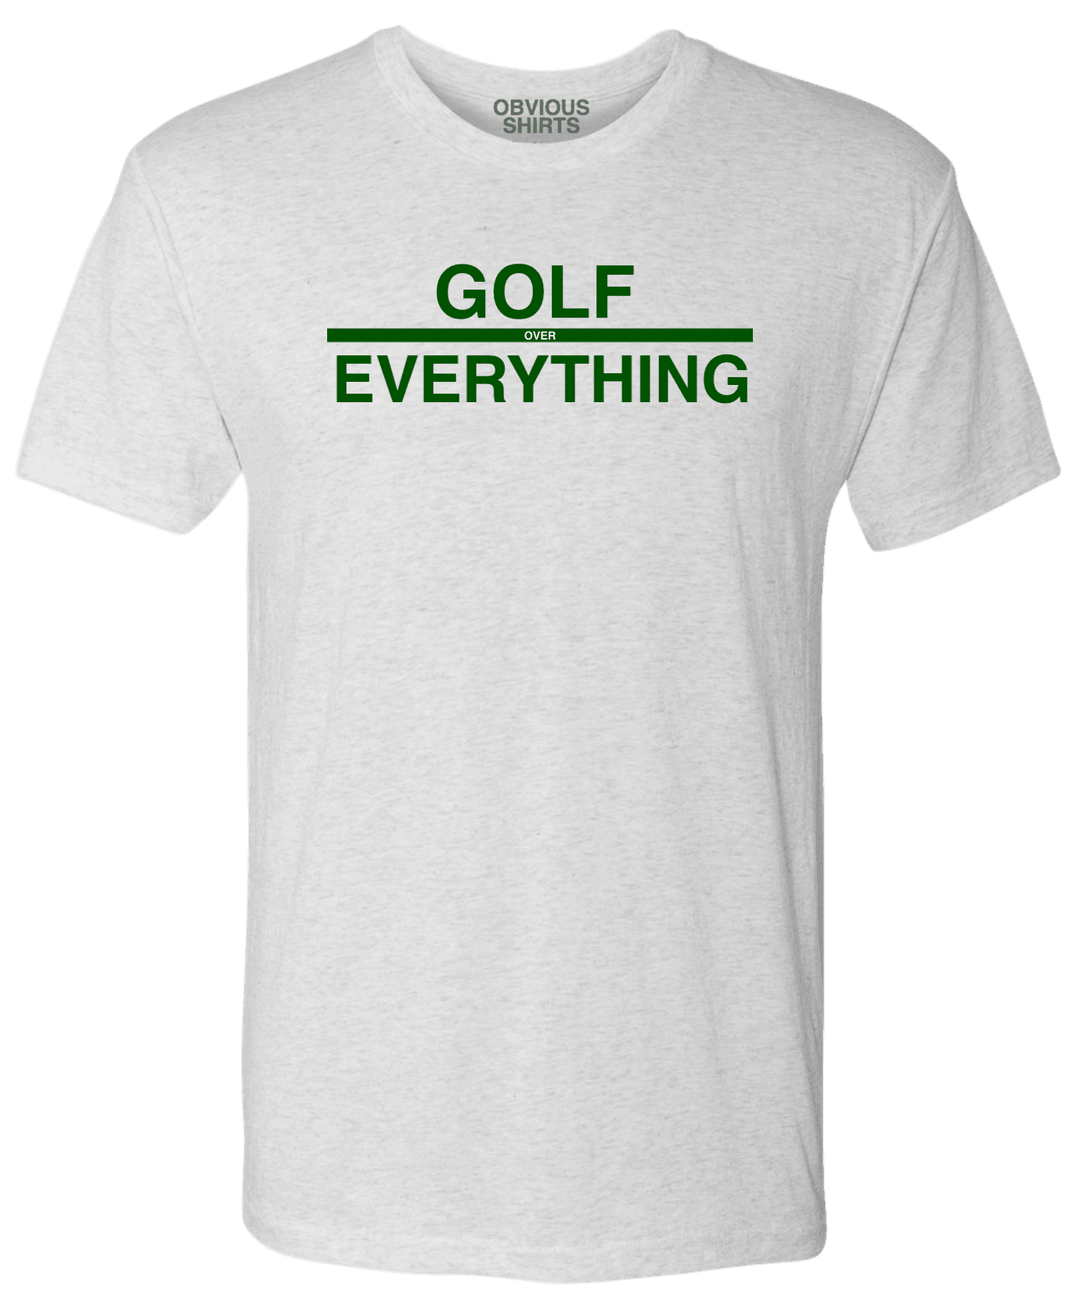 GOLF OVER EVERYTHING. - OBVIOUS SHIRTS.